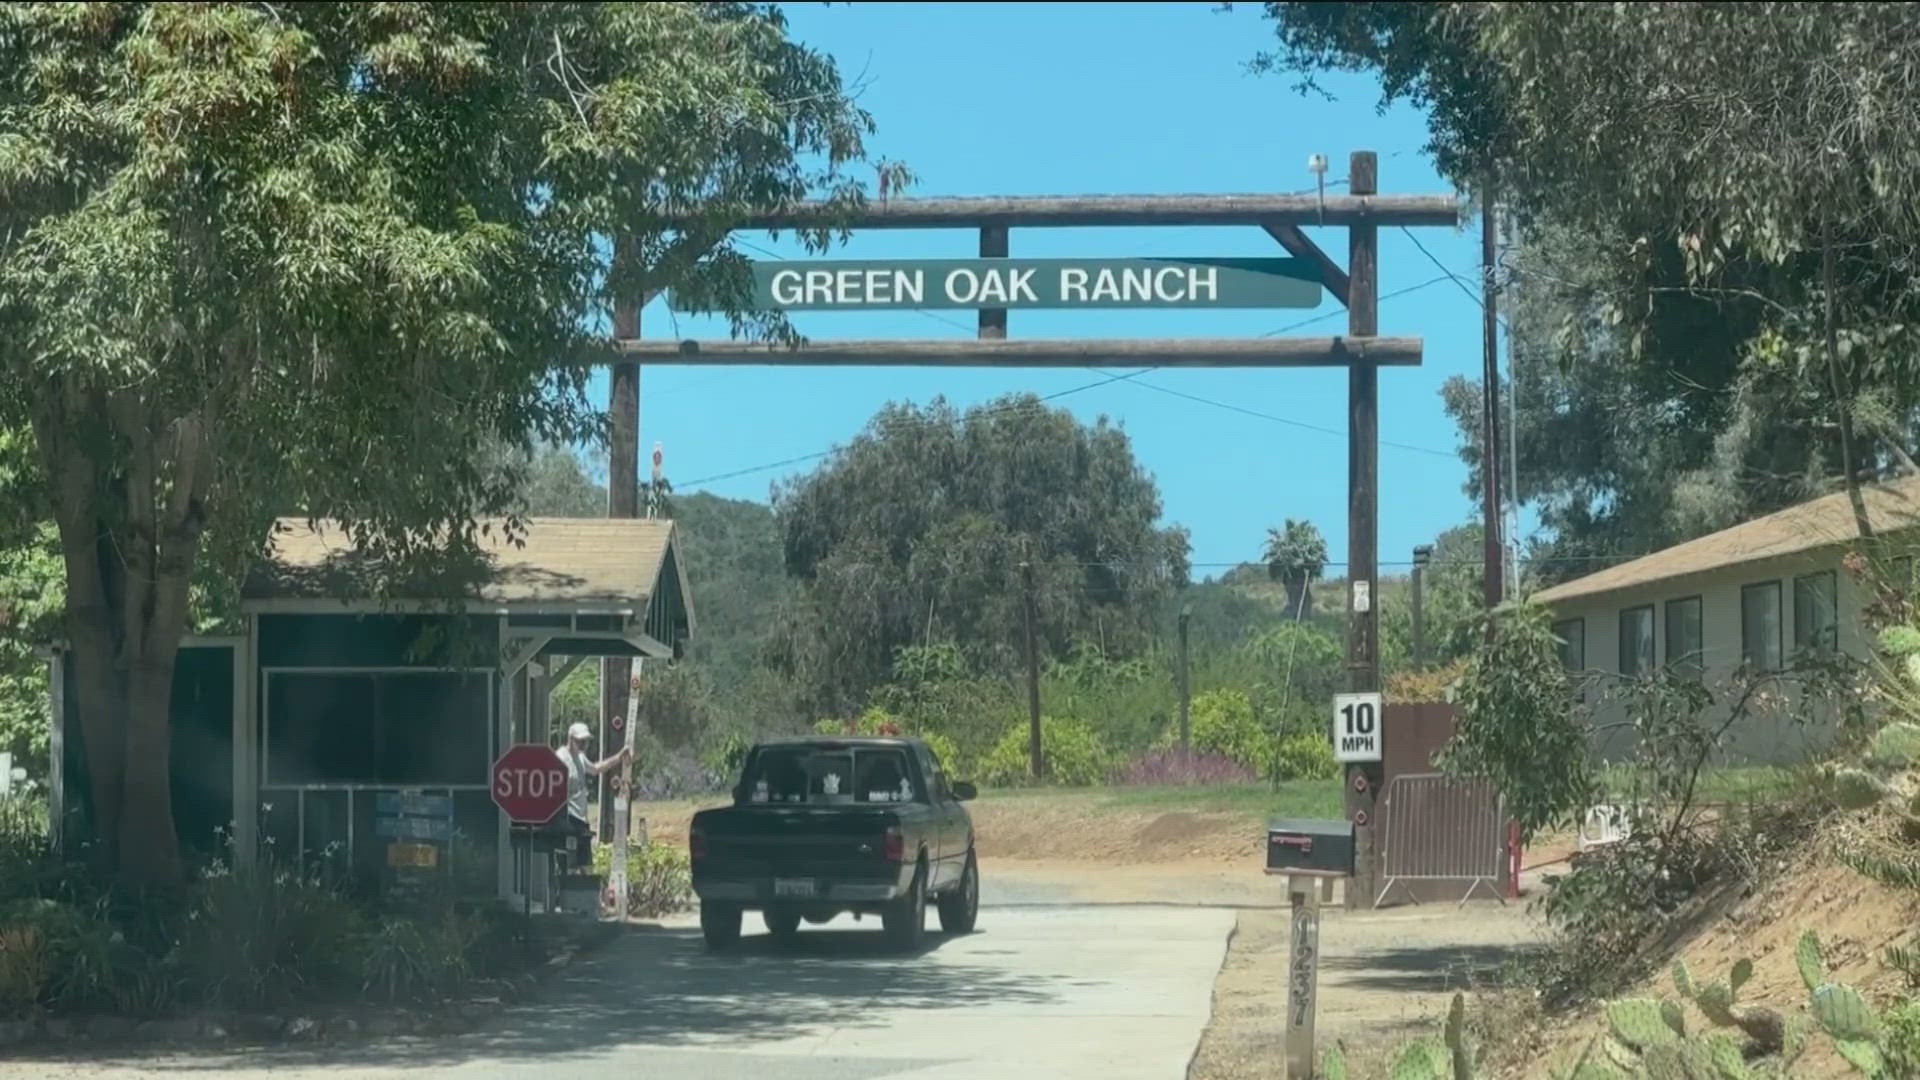 Solutions for Change wants to purchase Green Oak Ranch and share the 110 available acres of land with the city. It's a competing bid with the County.